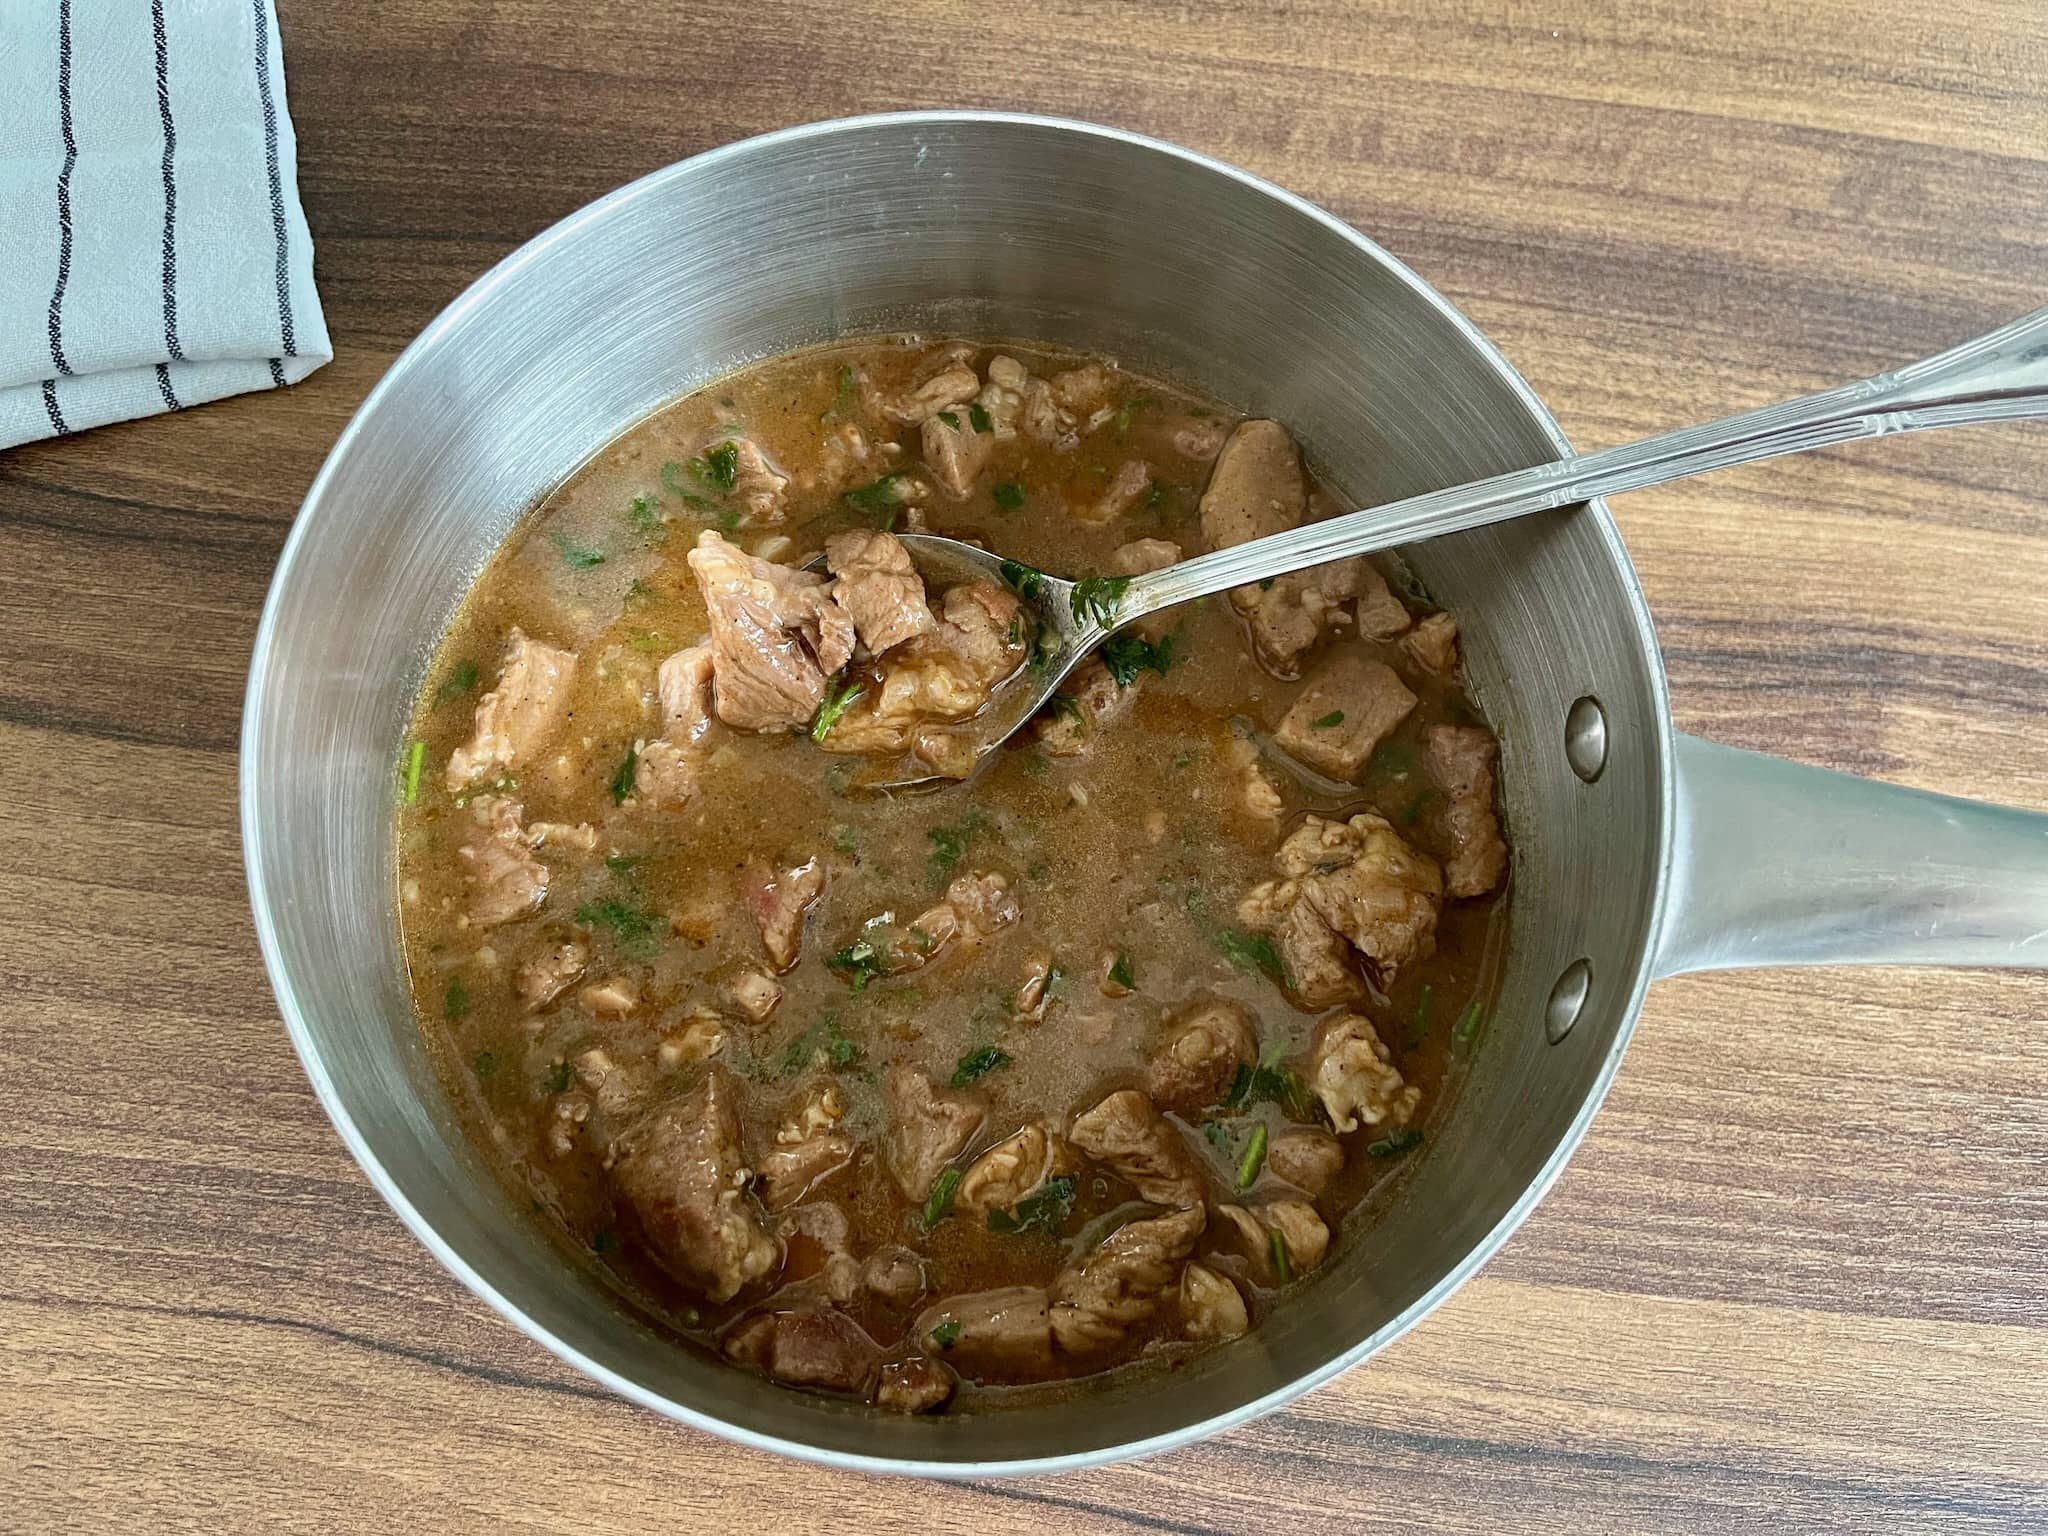 Finished pork goulash in a saucepan